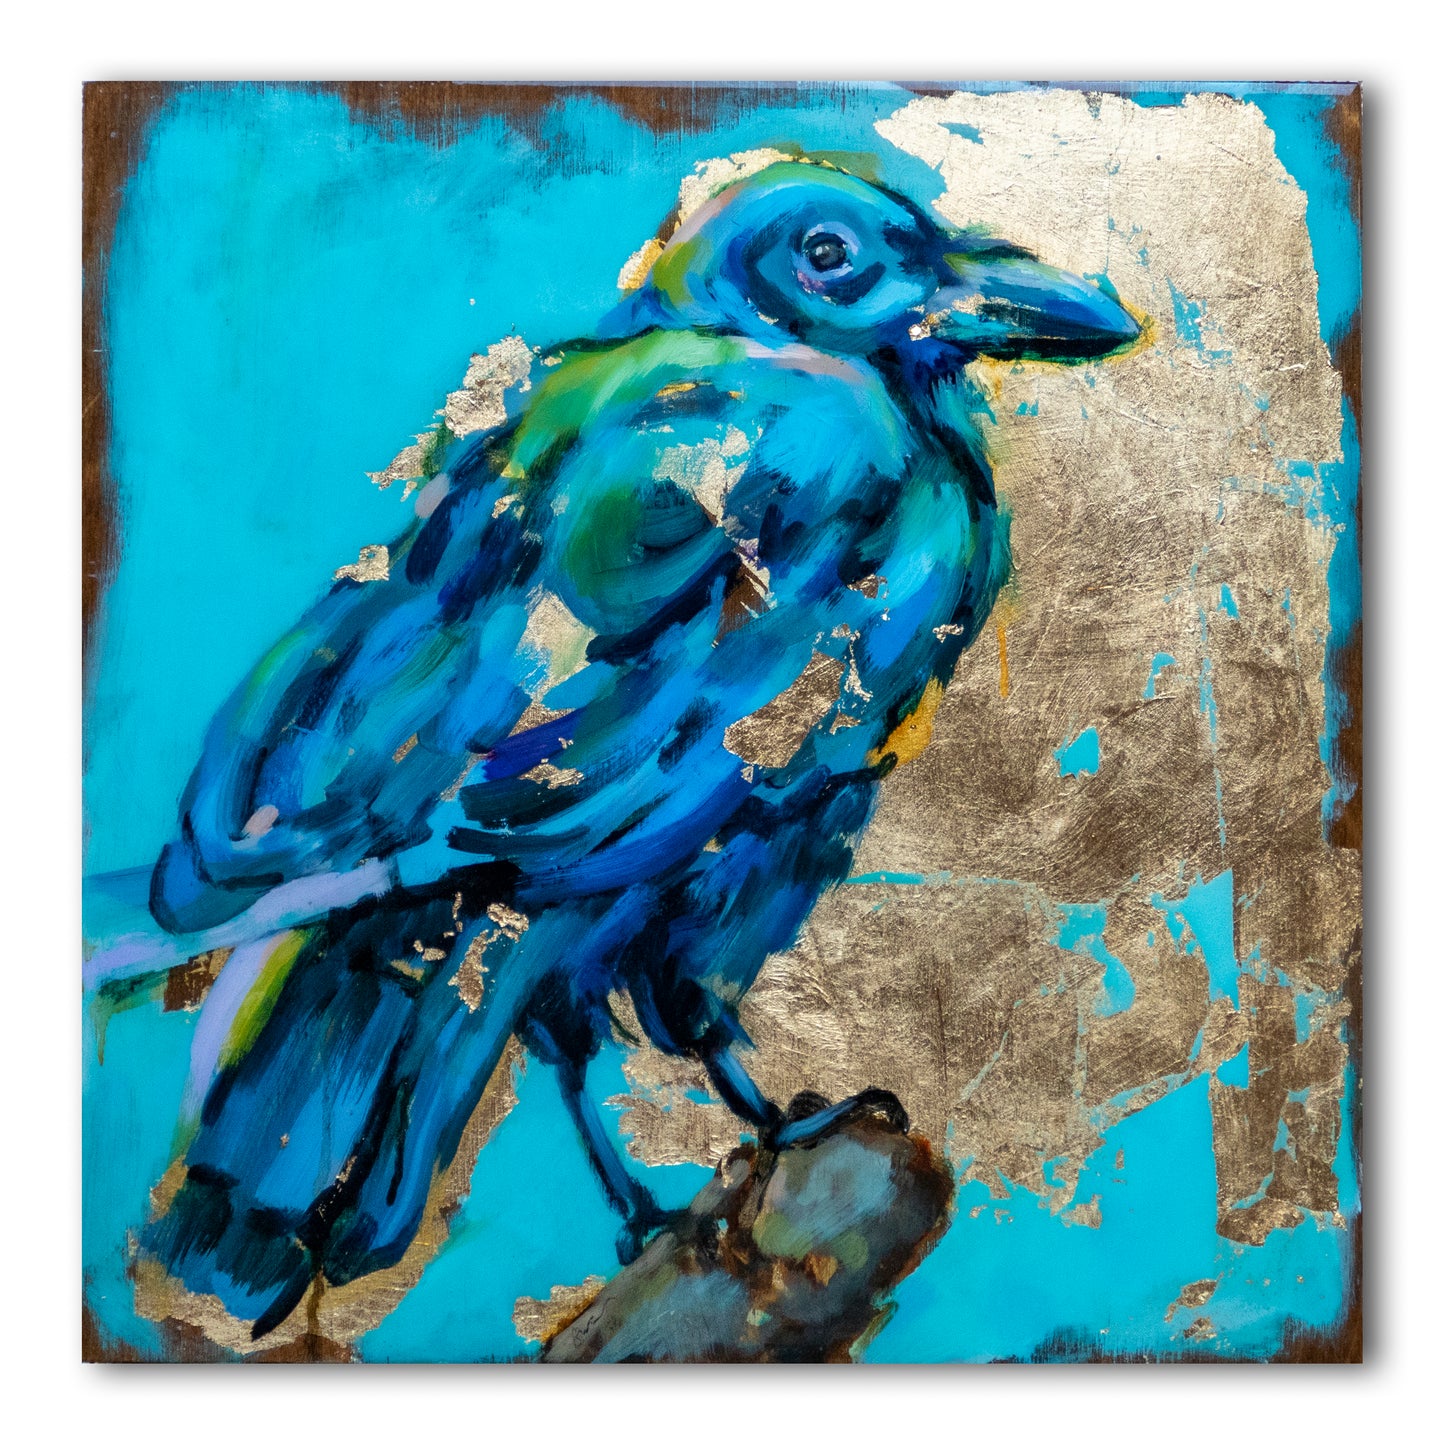 14"x14" painting of Raven  using mixed media; acrylic and oil, pencil, and gold leaf with glossy resin finish on surface; shades of blue and gold; artist Shaney Watters